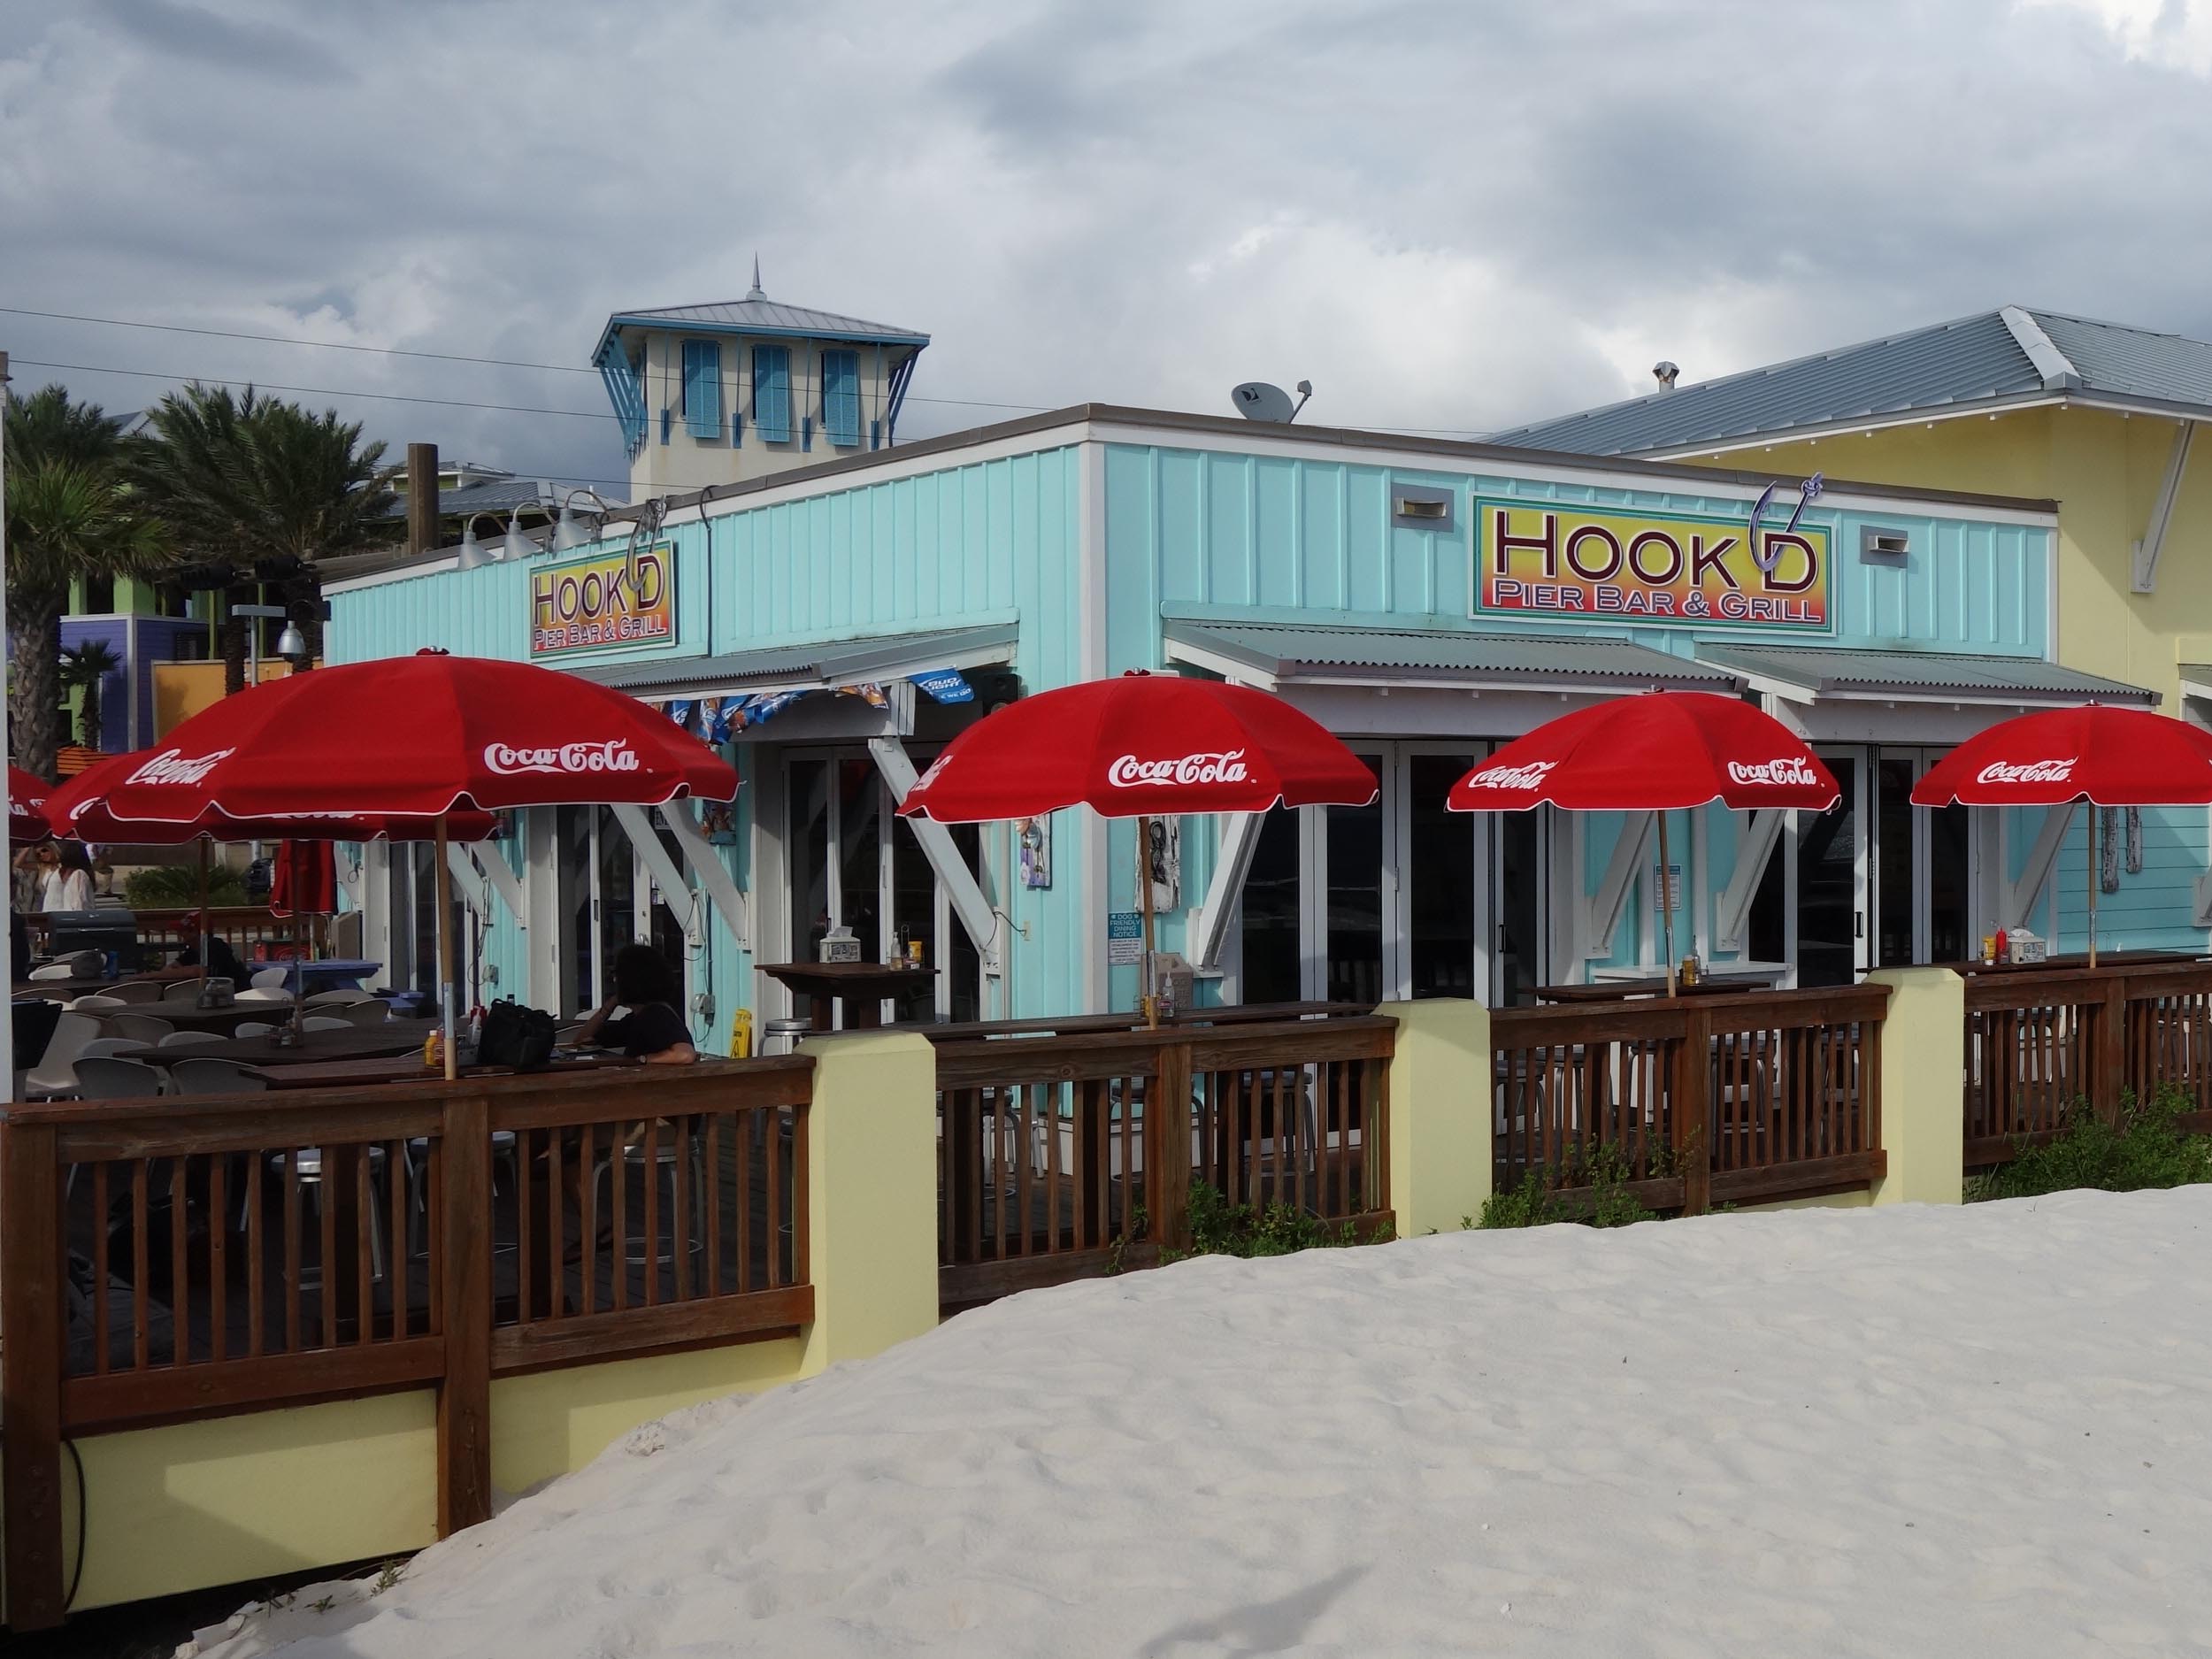 Hook'd Pier Bar and Grill Patio